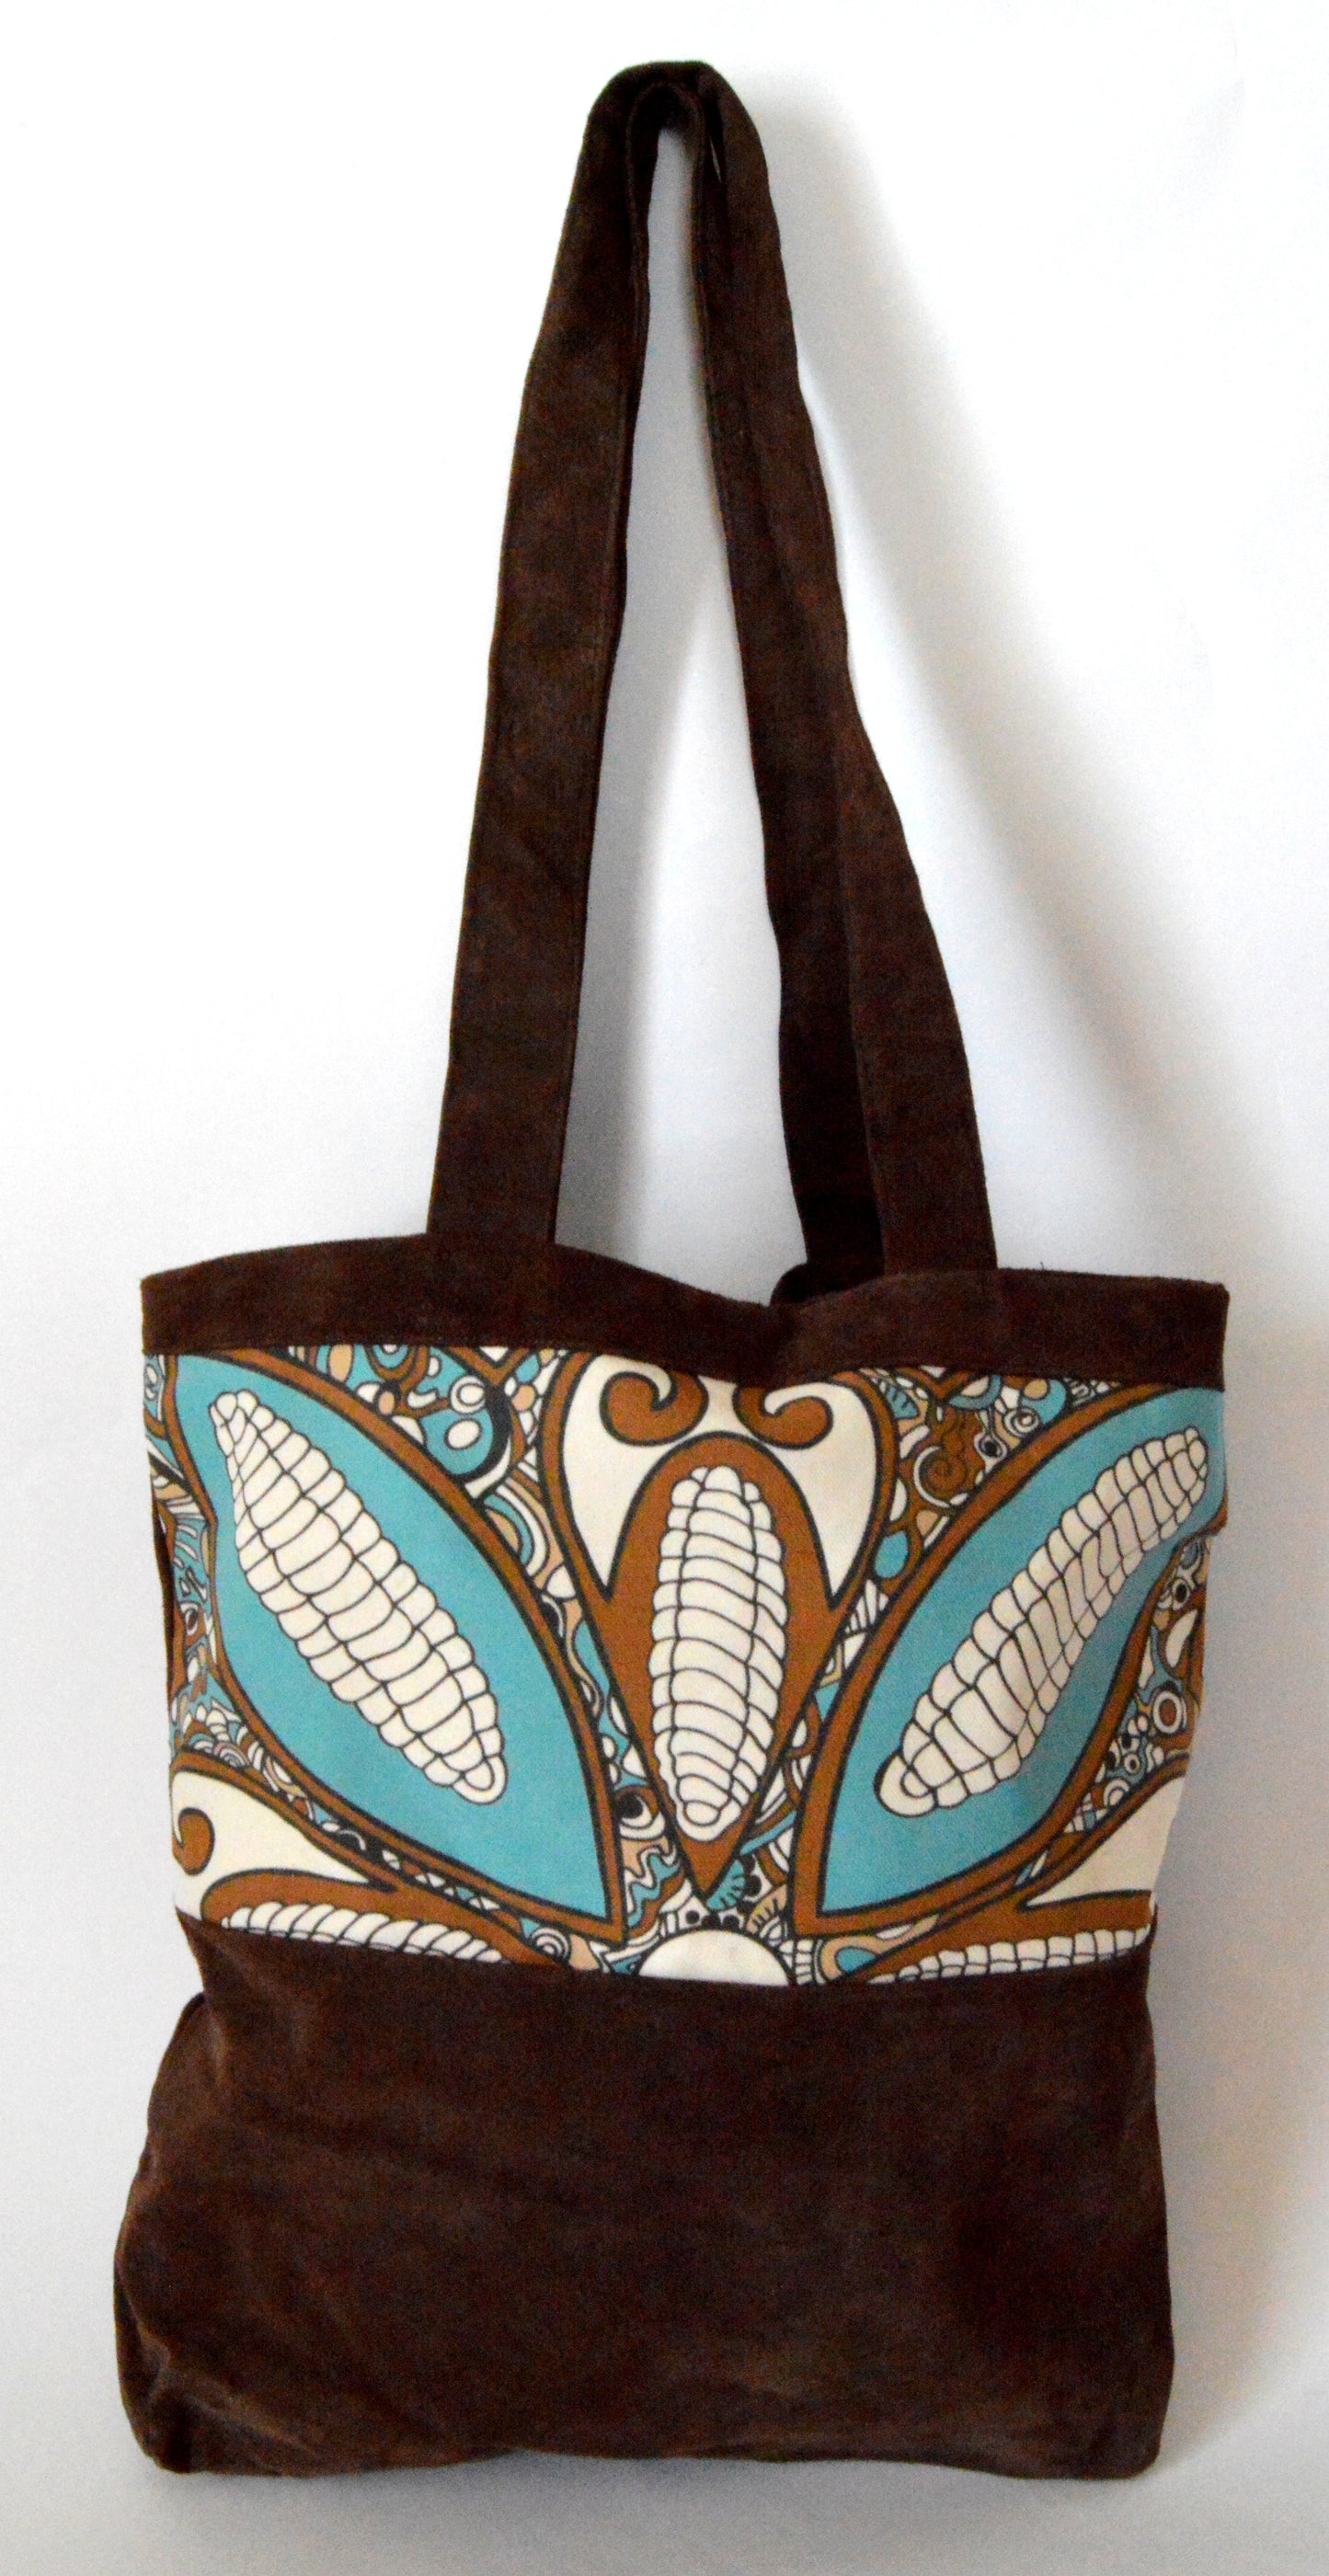 Graphic Totes